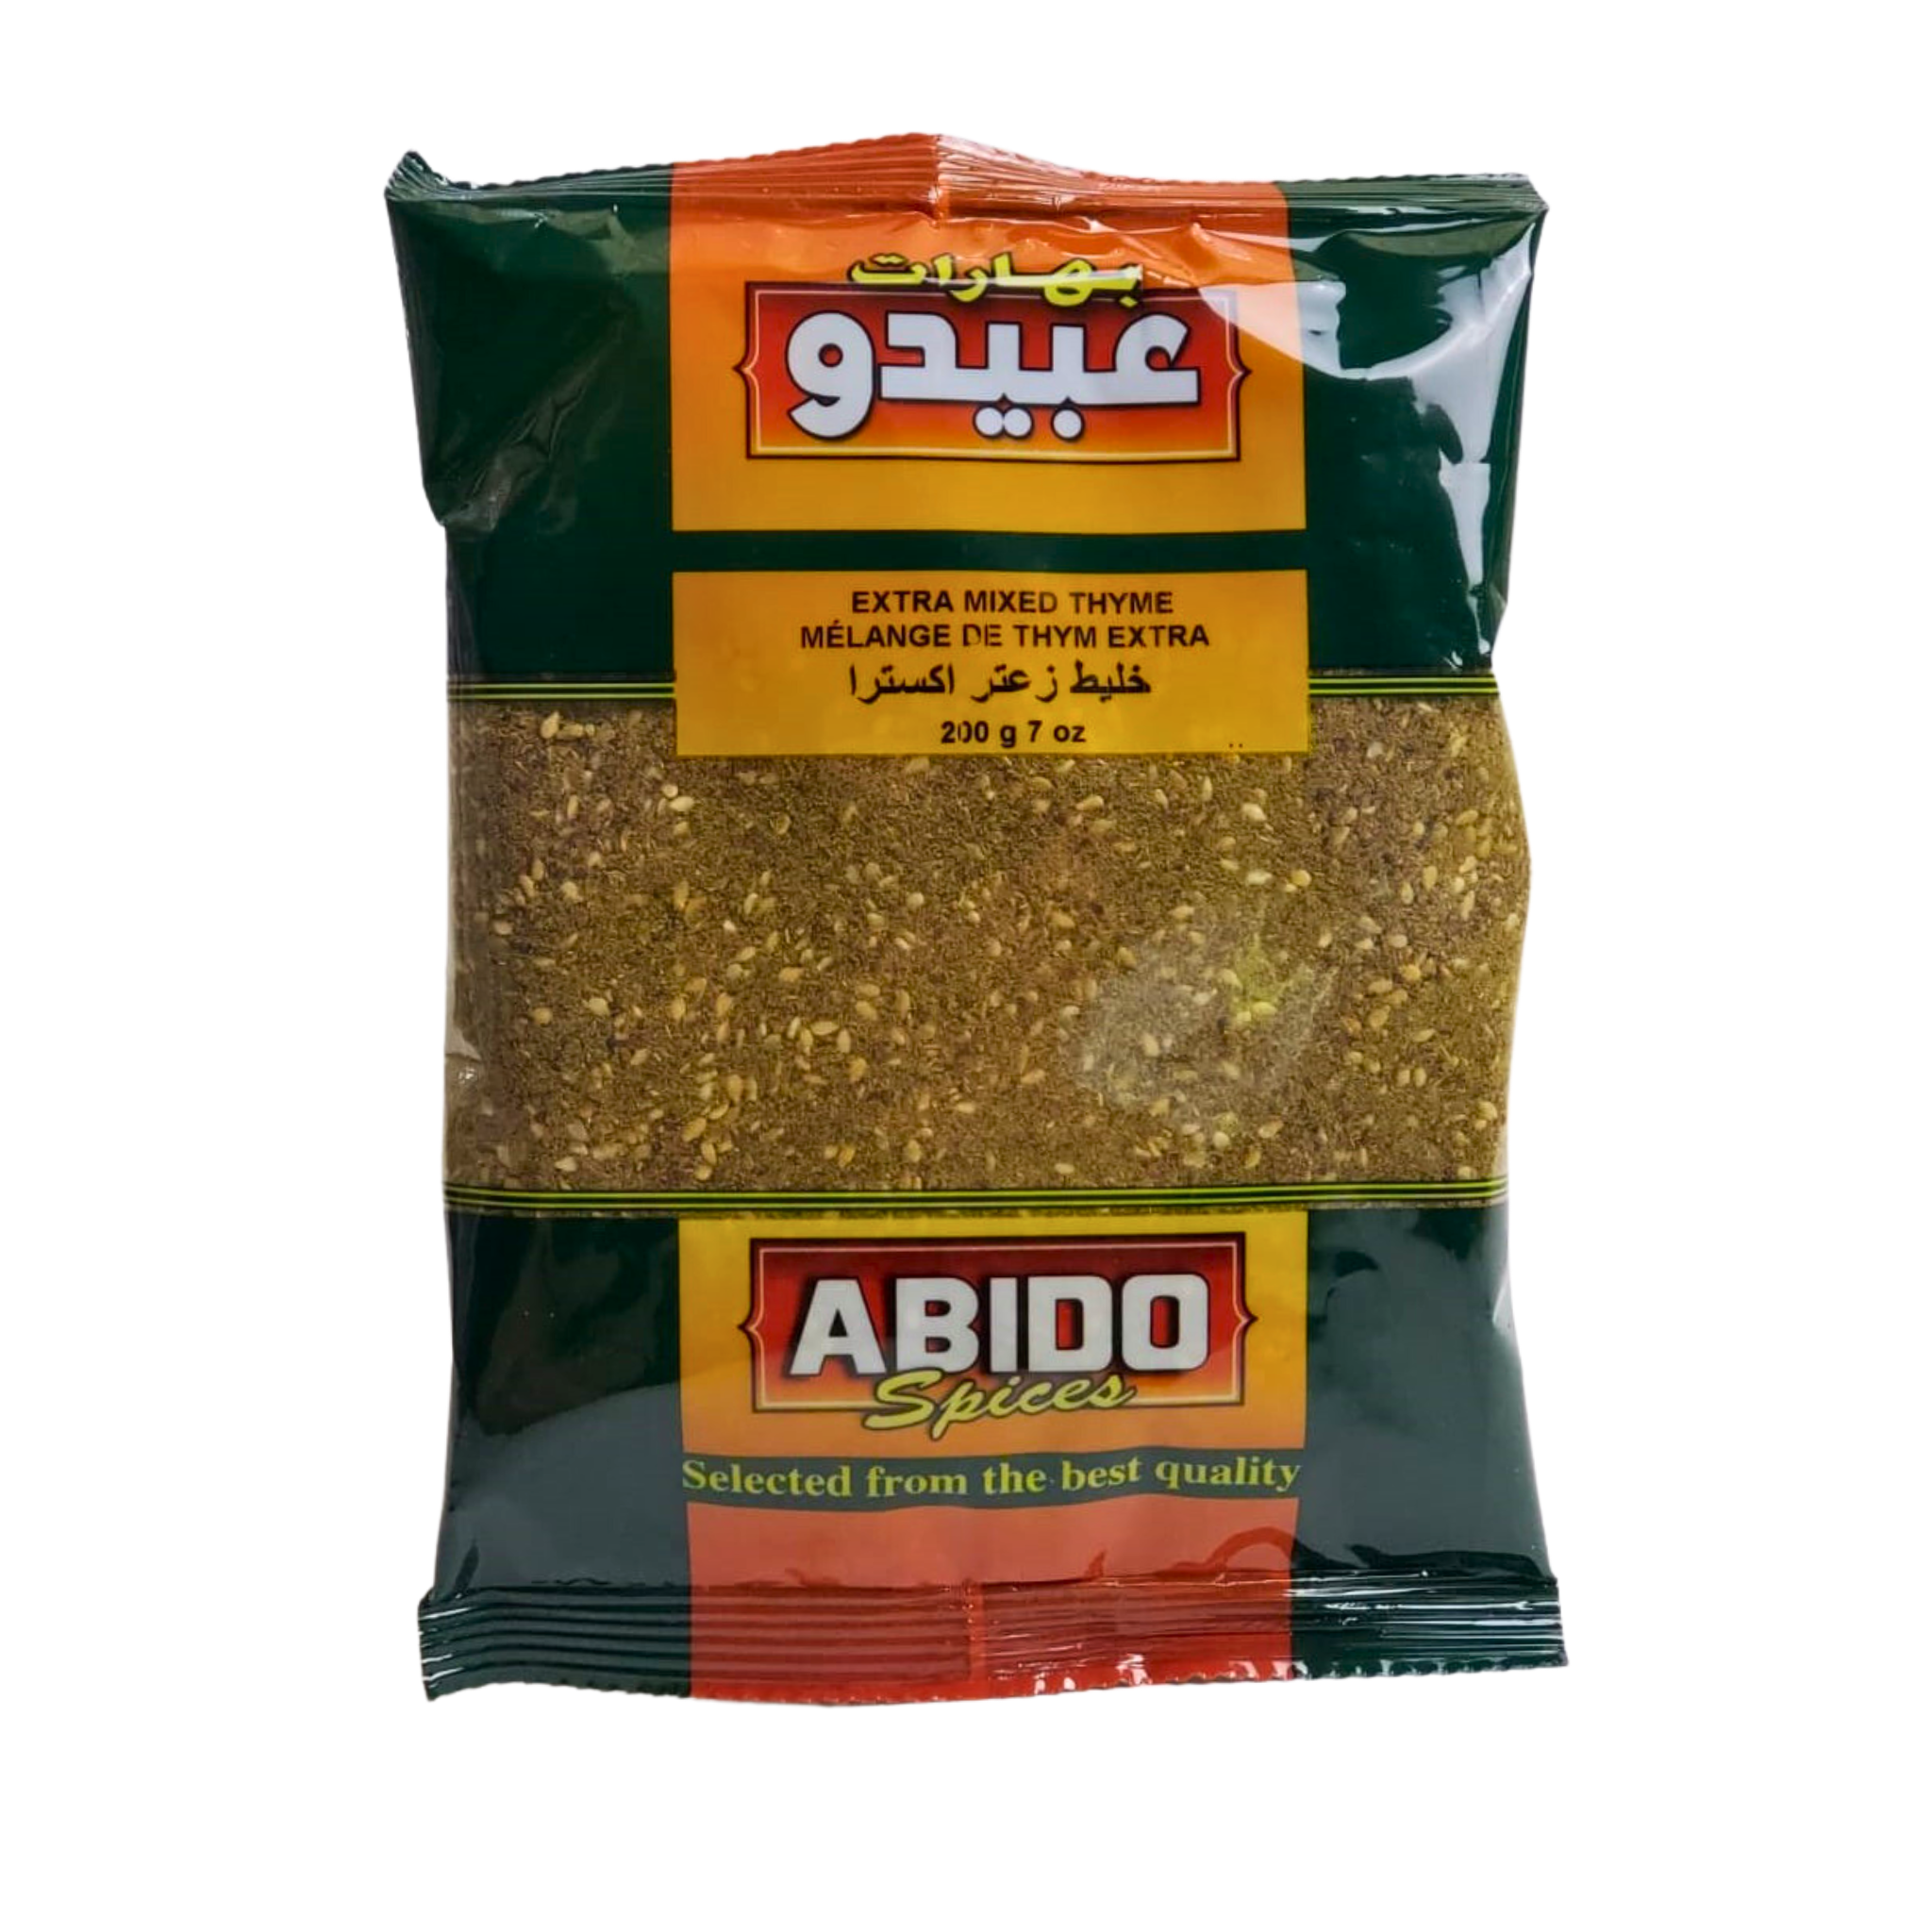 ABIDO Spices Extra Mixed Thyme 200 g